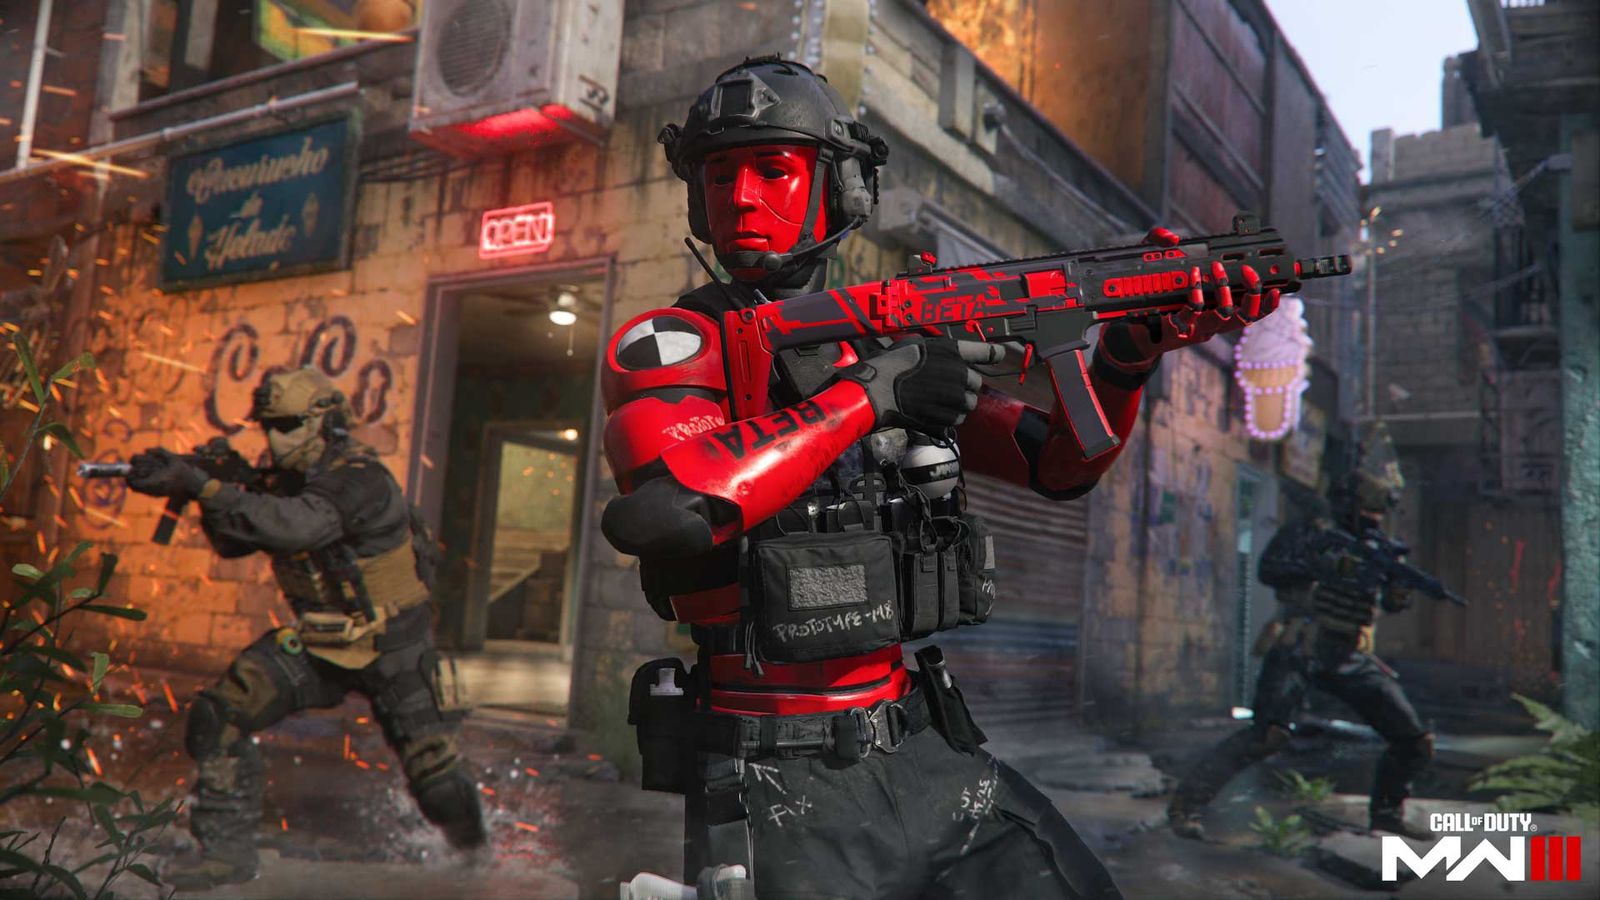 Modern Warfare 3 player wearing red Operator skin and carrying assault rifle